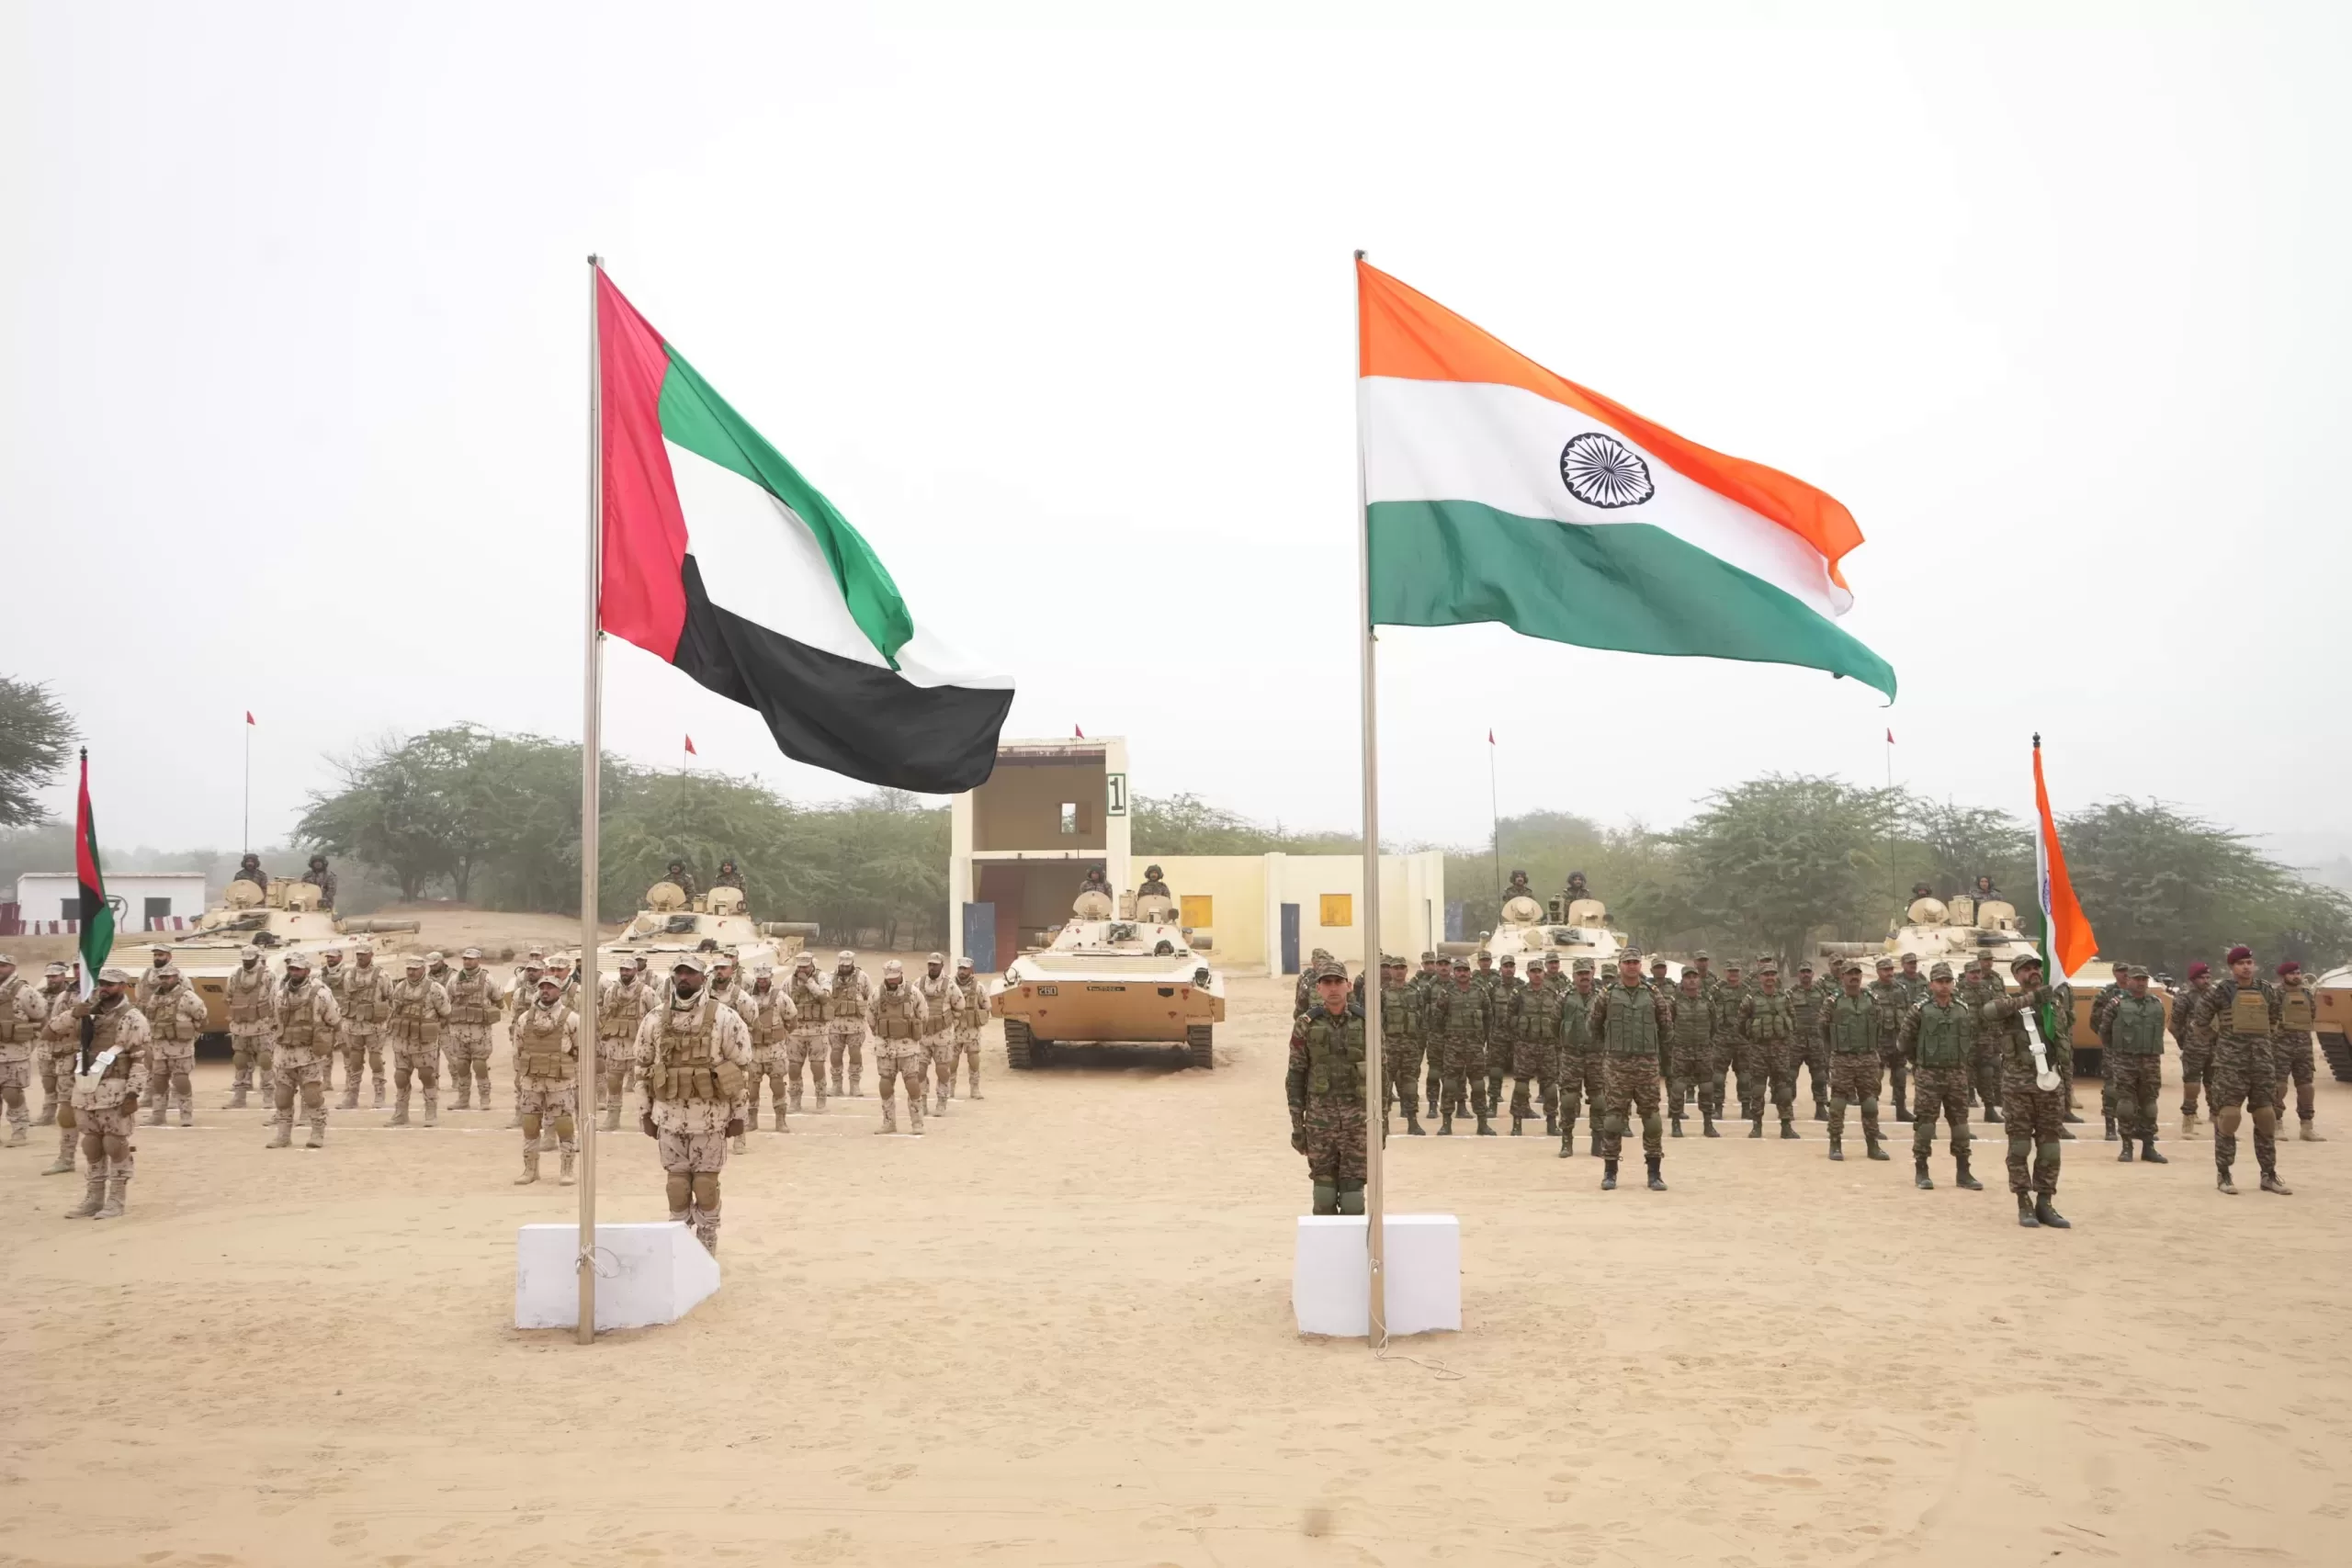 India-UAE Joint Military Exercise "Desert Cyclone" Starts in Rajasthan